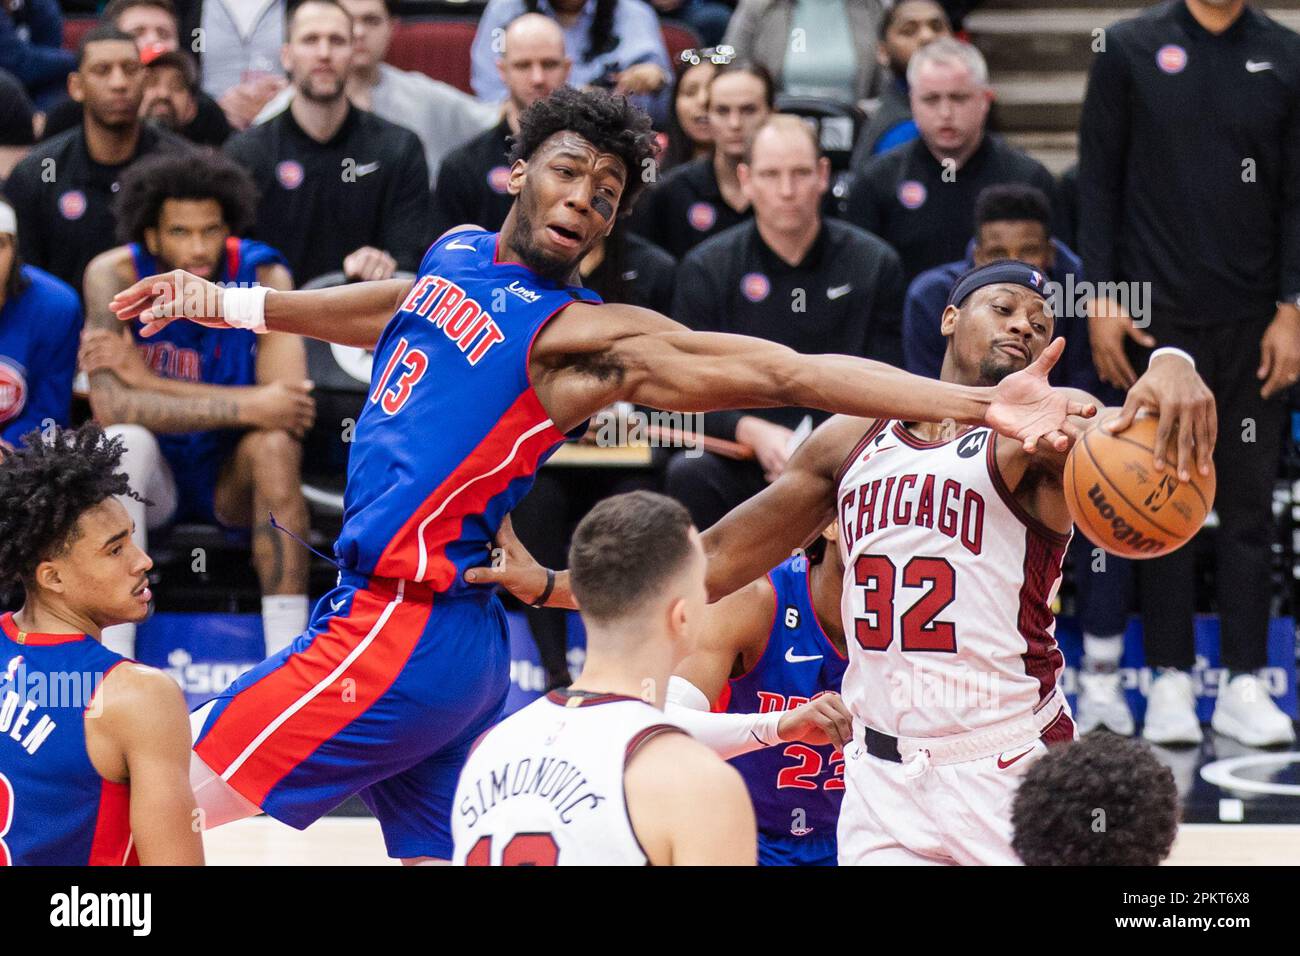 Chicago, USA. 09th Apr, 2023. Chicago, USA, April 9, 2023: James Wiseman (13 Detroit Pistons) reaches for the rebound during the game between the Chicago Bulls and Detroit Pistons on Sunday April 9, 2023 at the United Center, Chicago, USA. (NO COMMERCIAL USAGE) (Shaina Benhiyoun/SPP) Credit: SPP Sport Press Photo. /Alamy Live News Stock Photo